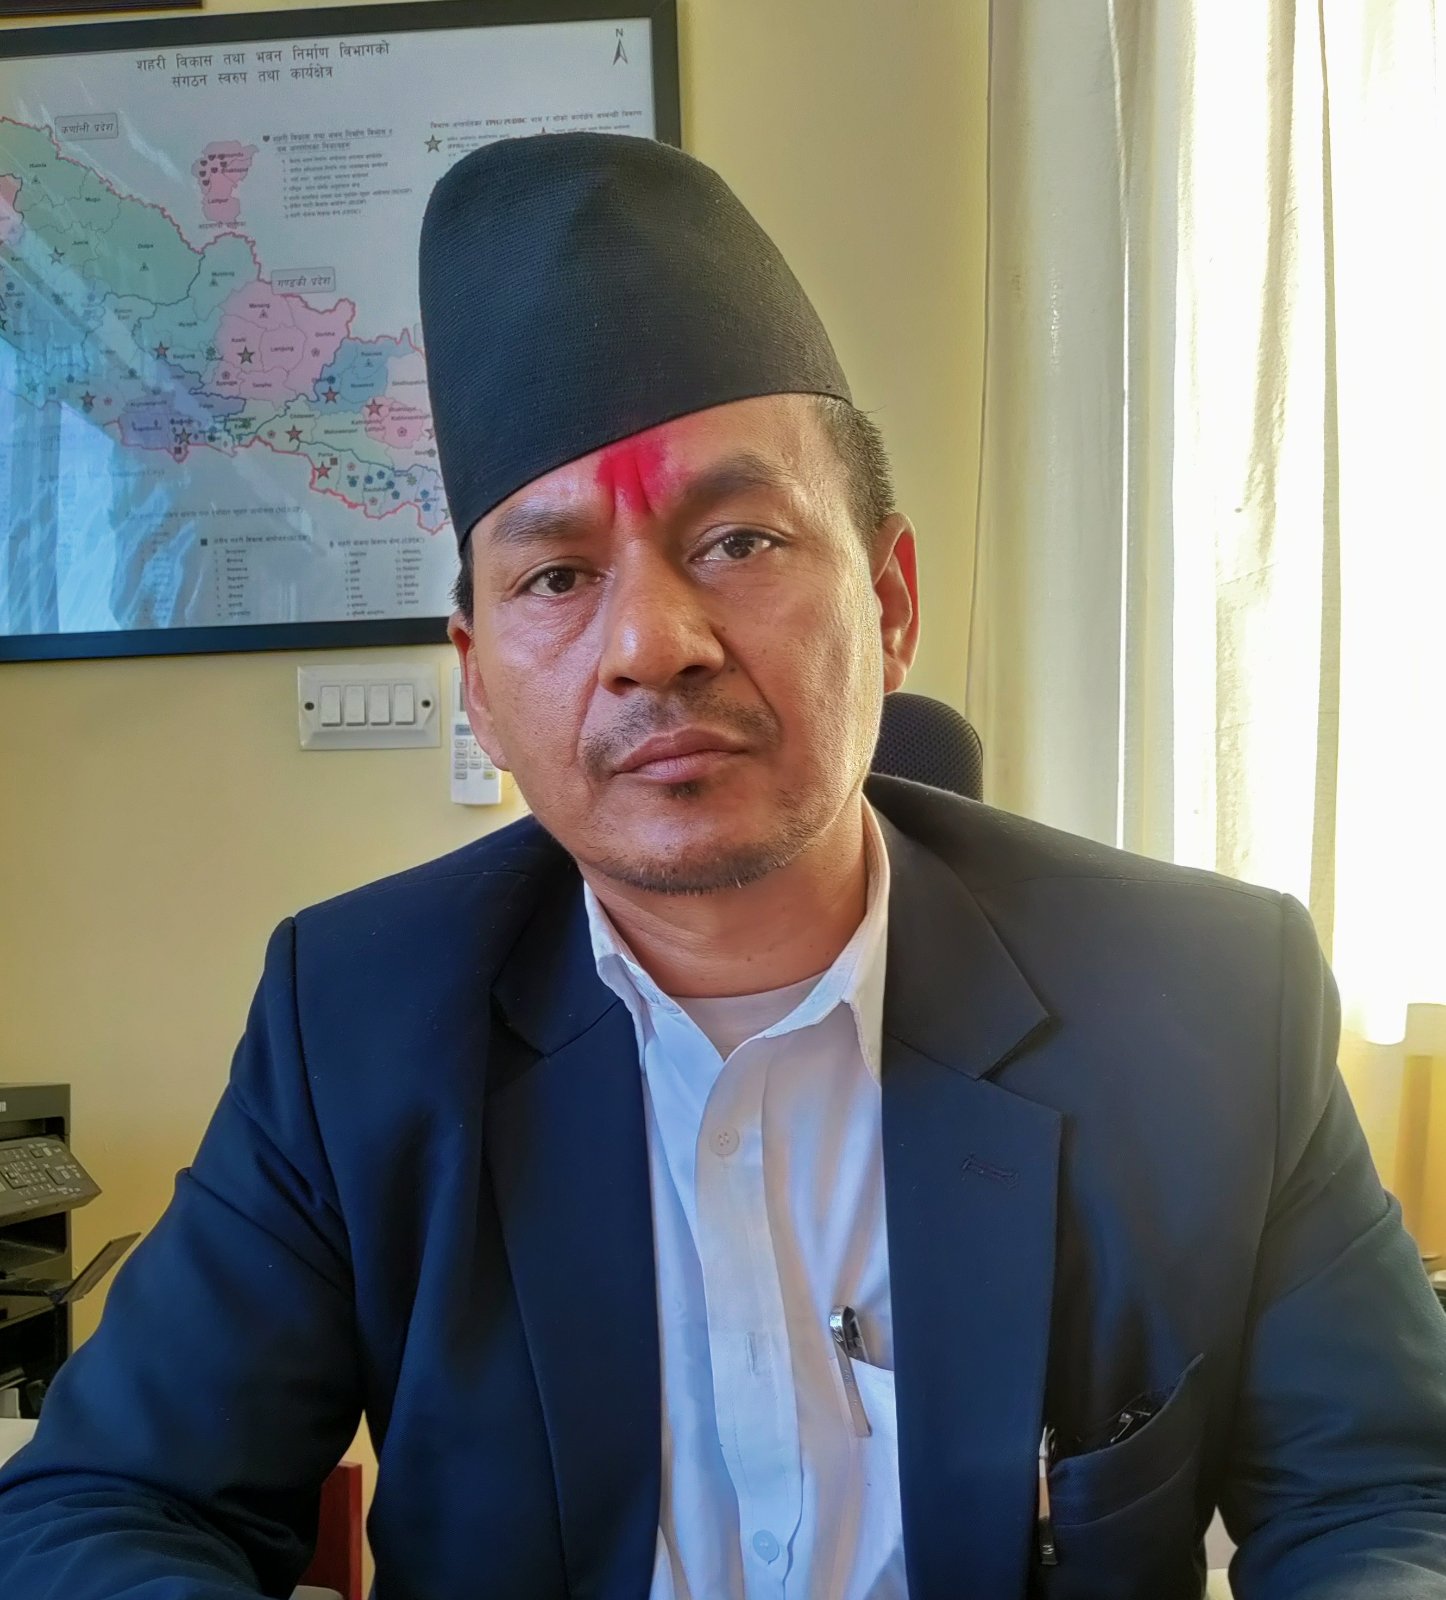 Government of Nepal members image